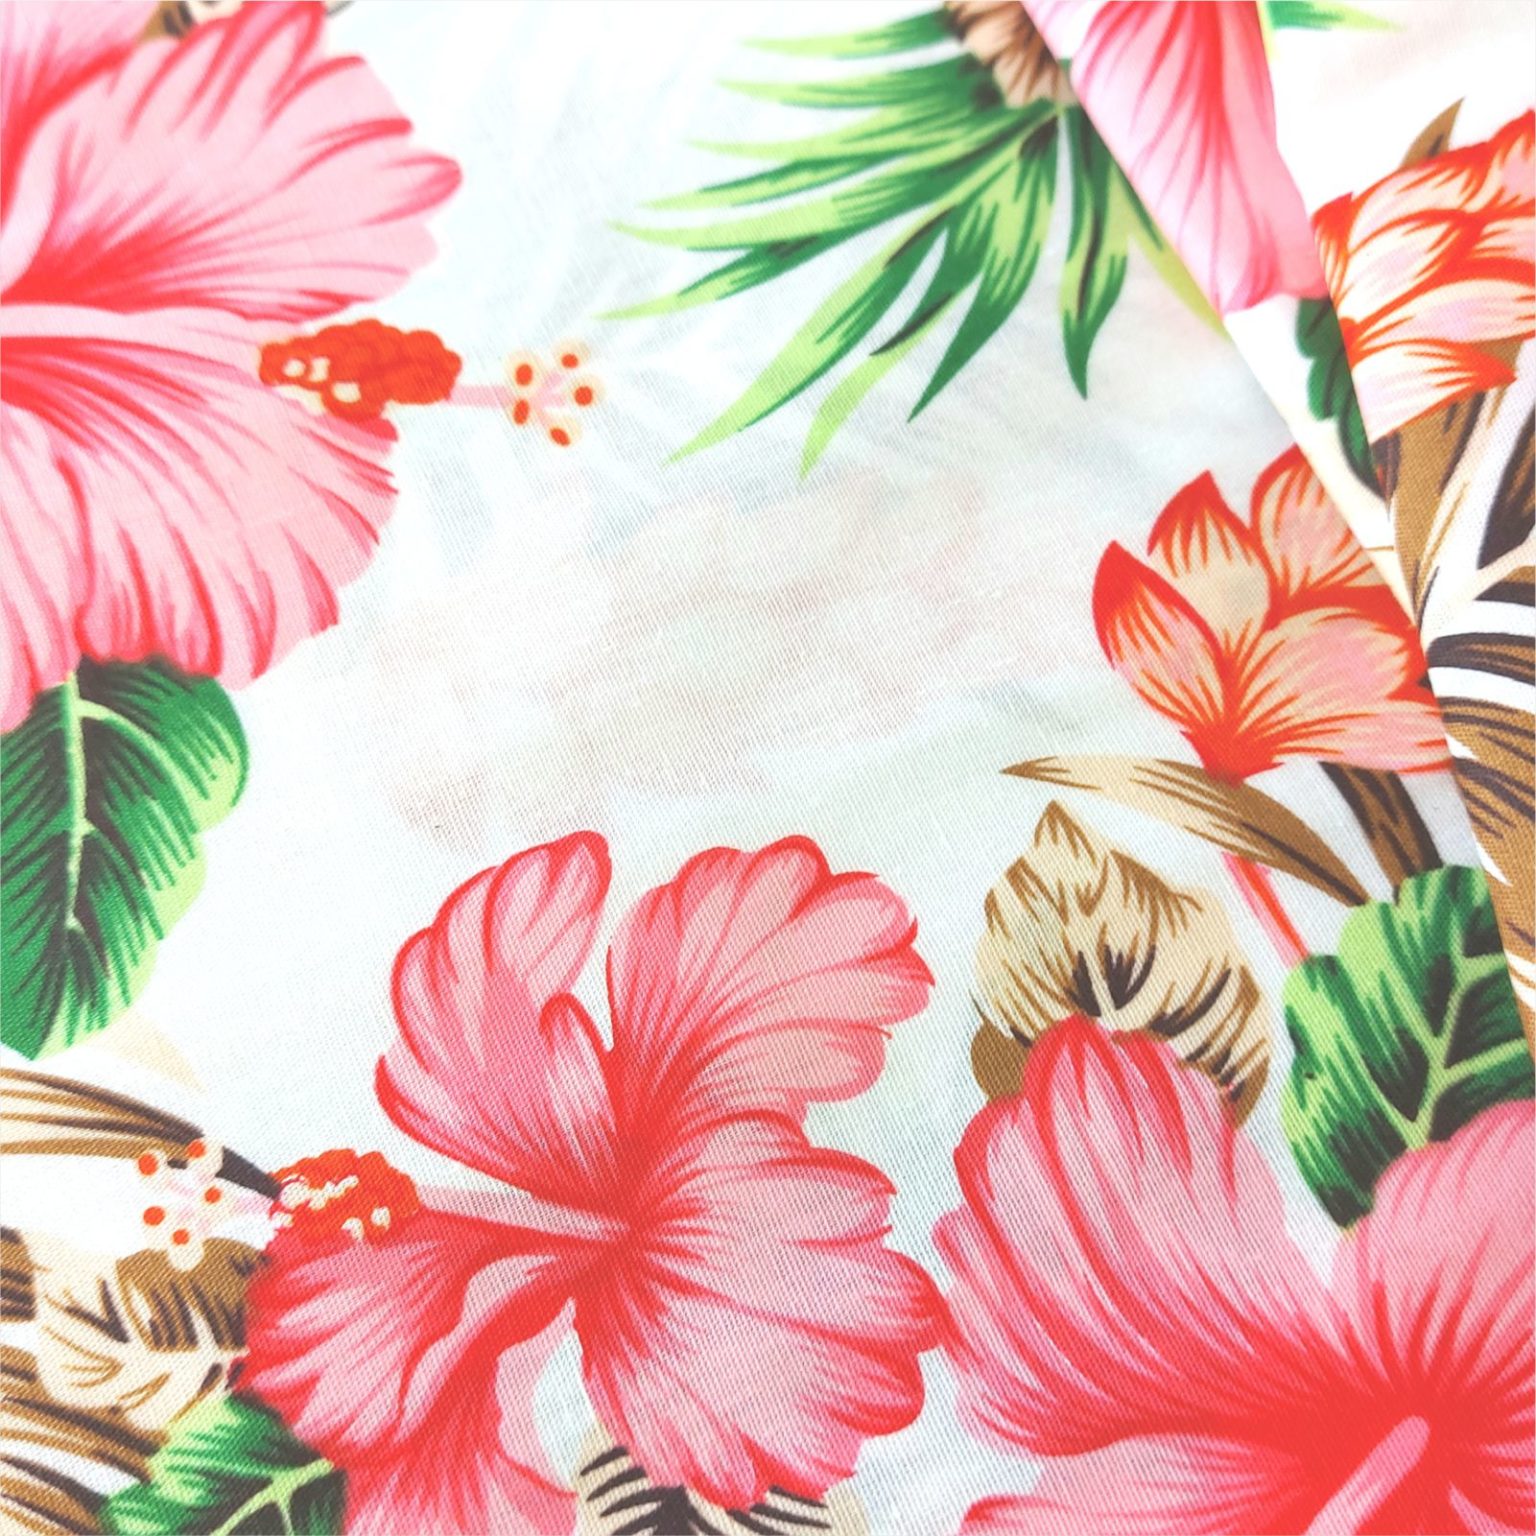 Hibiscus on White Cotton Fabric at More Sewing